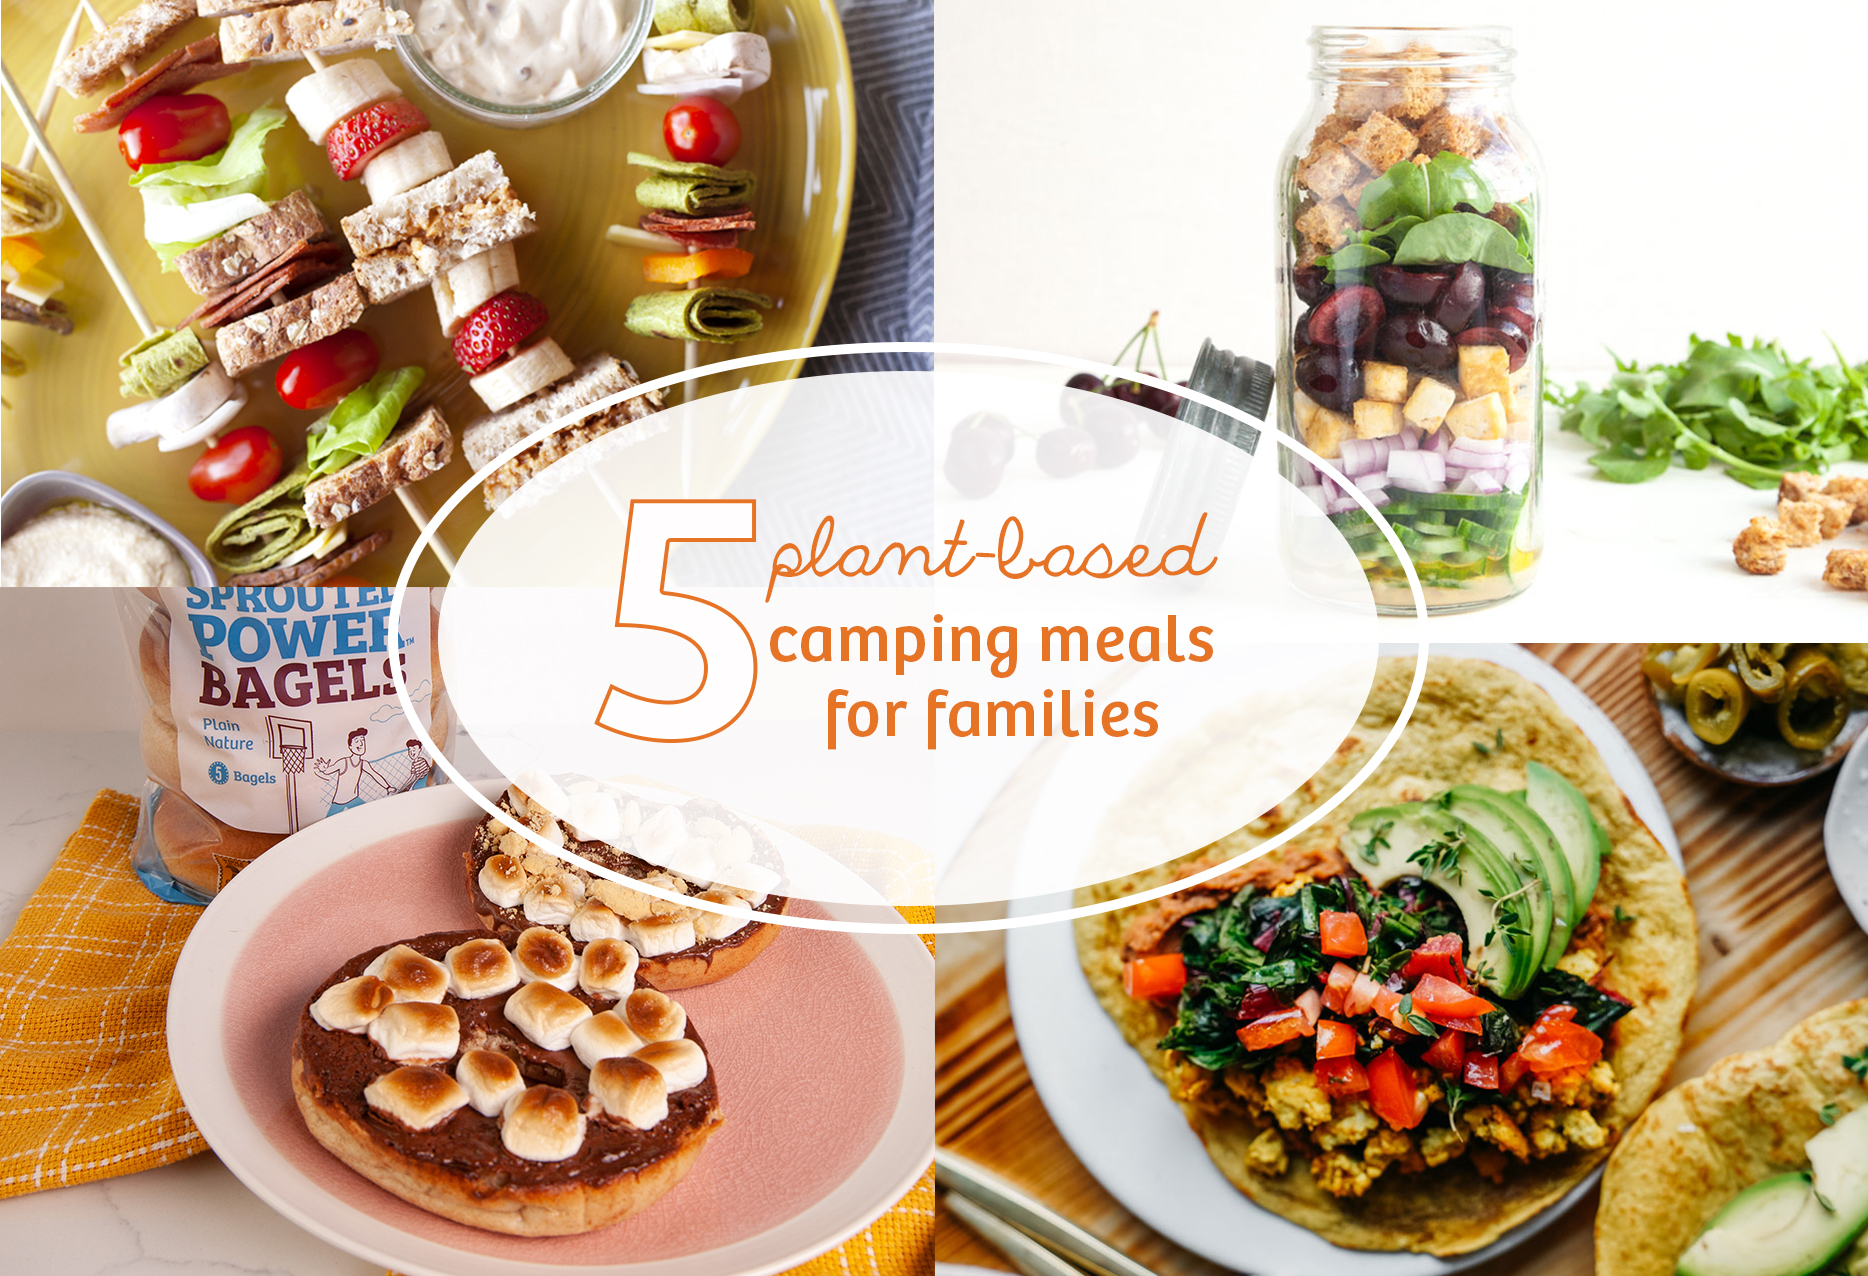 5 Easy Plant-Based Camping Meals for Families